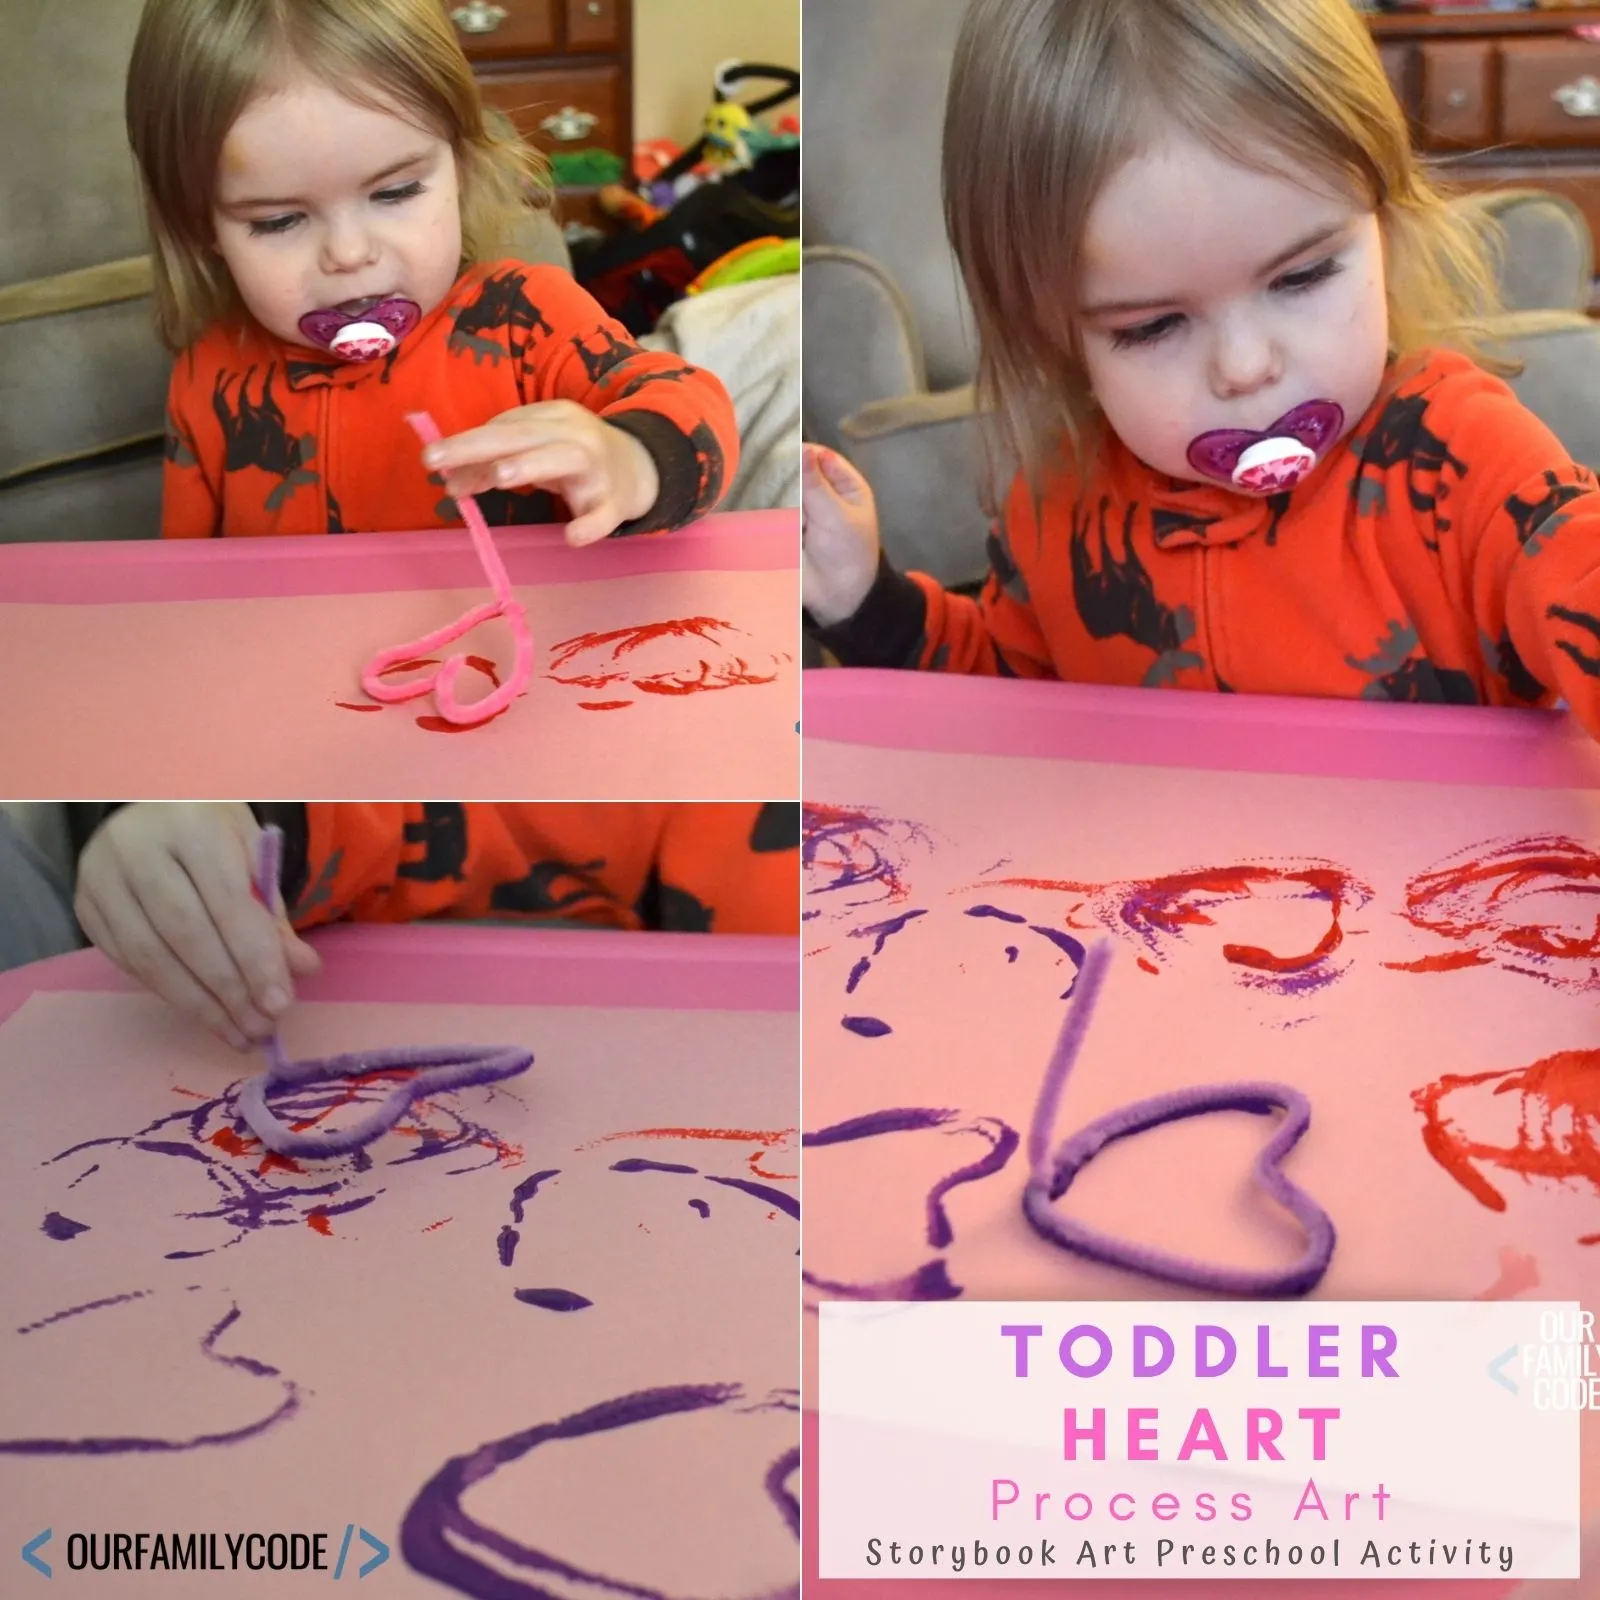 A picture of pipe cleaner painting activity for preschoolers and toddlers.